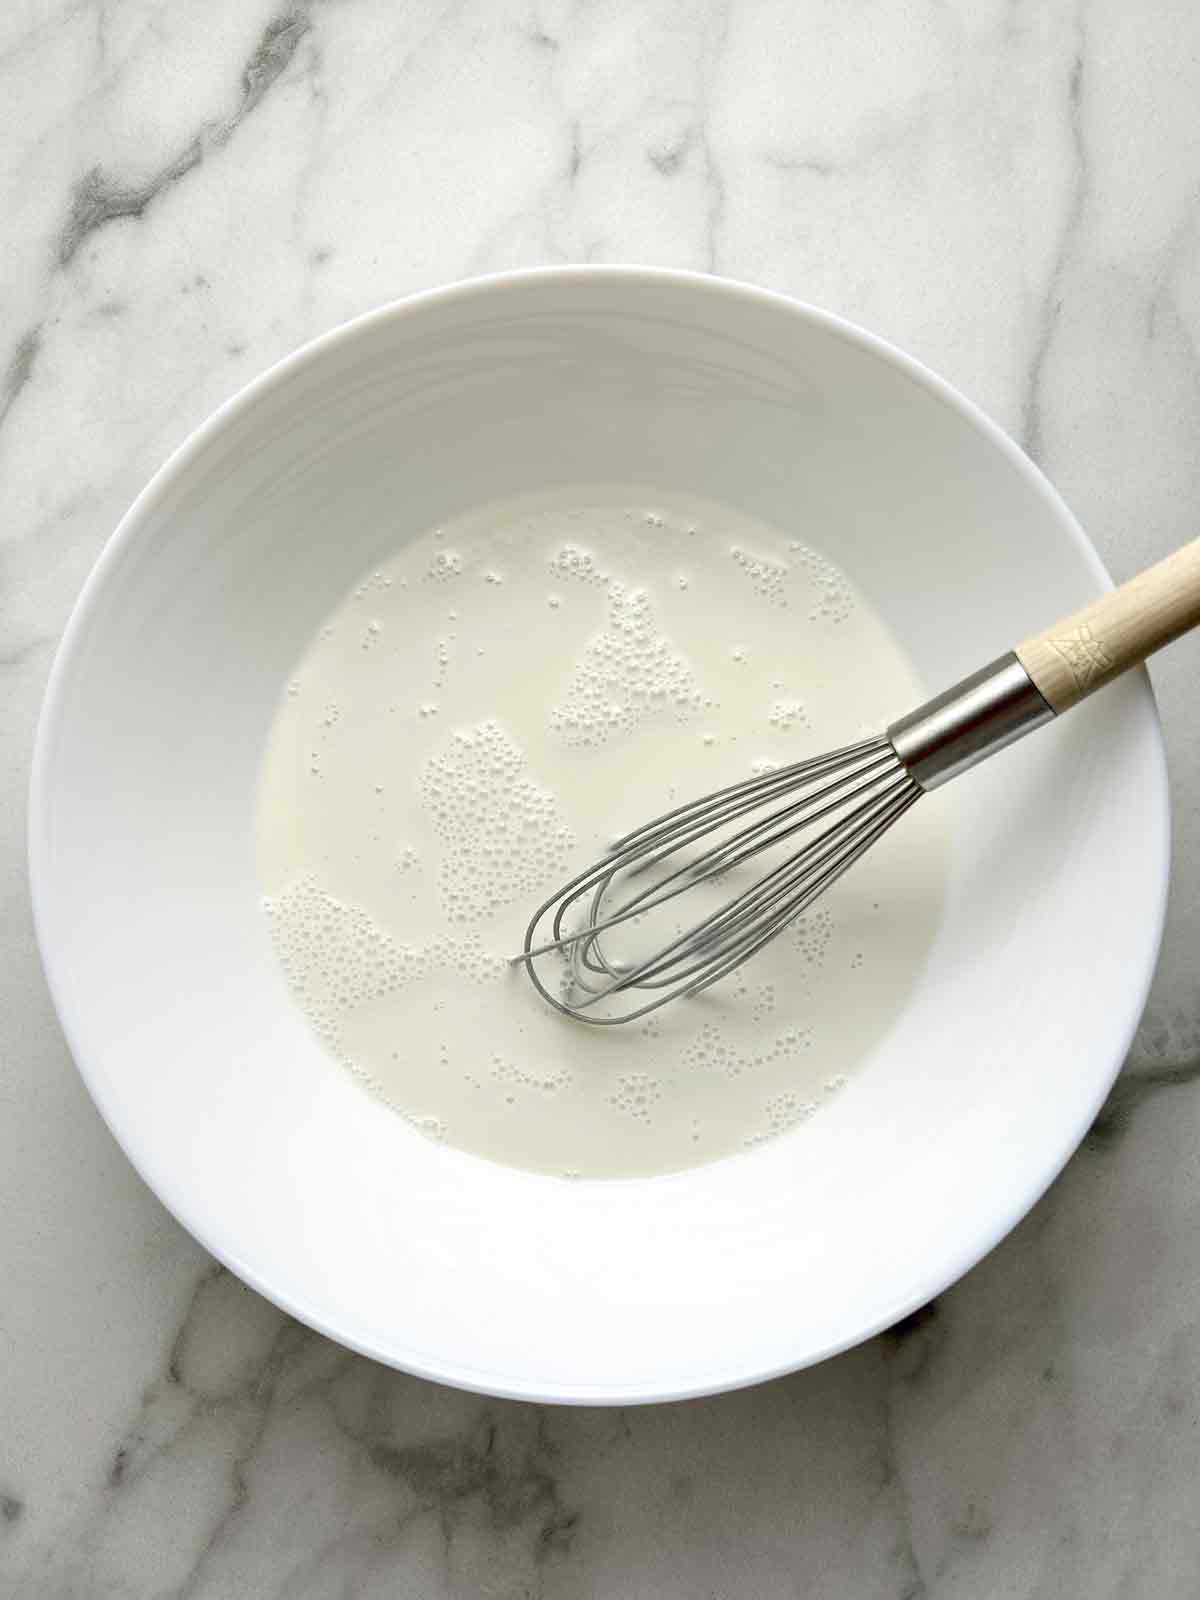 glutinous rice flour, sugar, and water whisked in a bowl